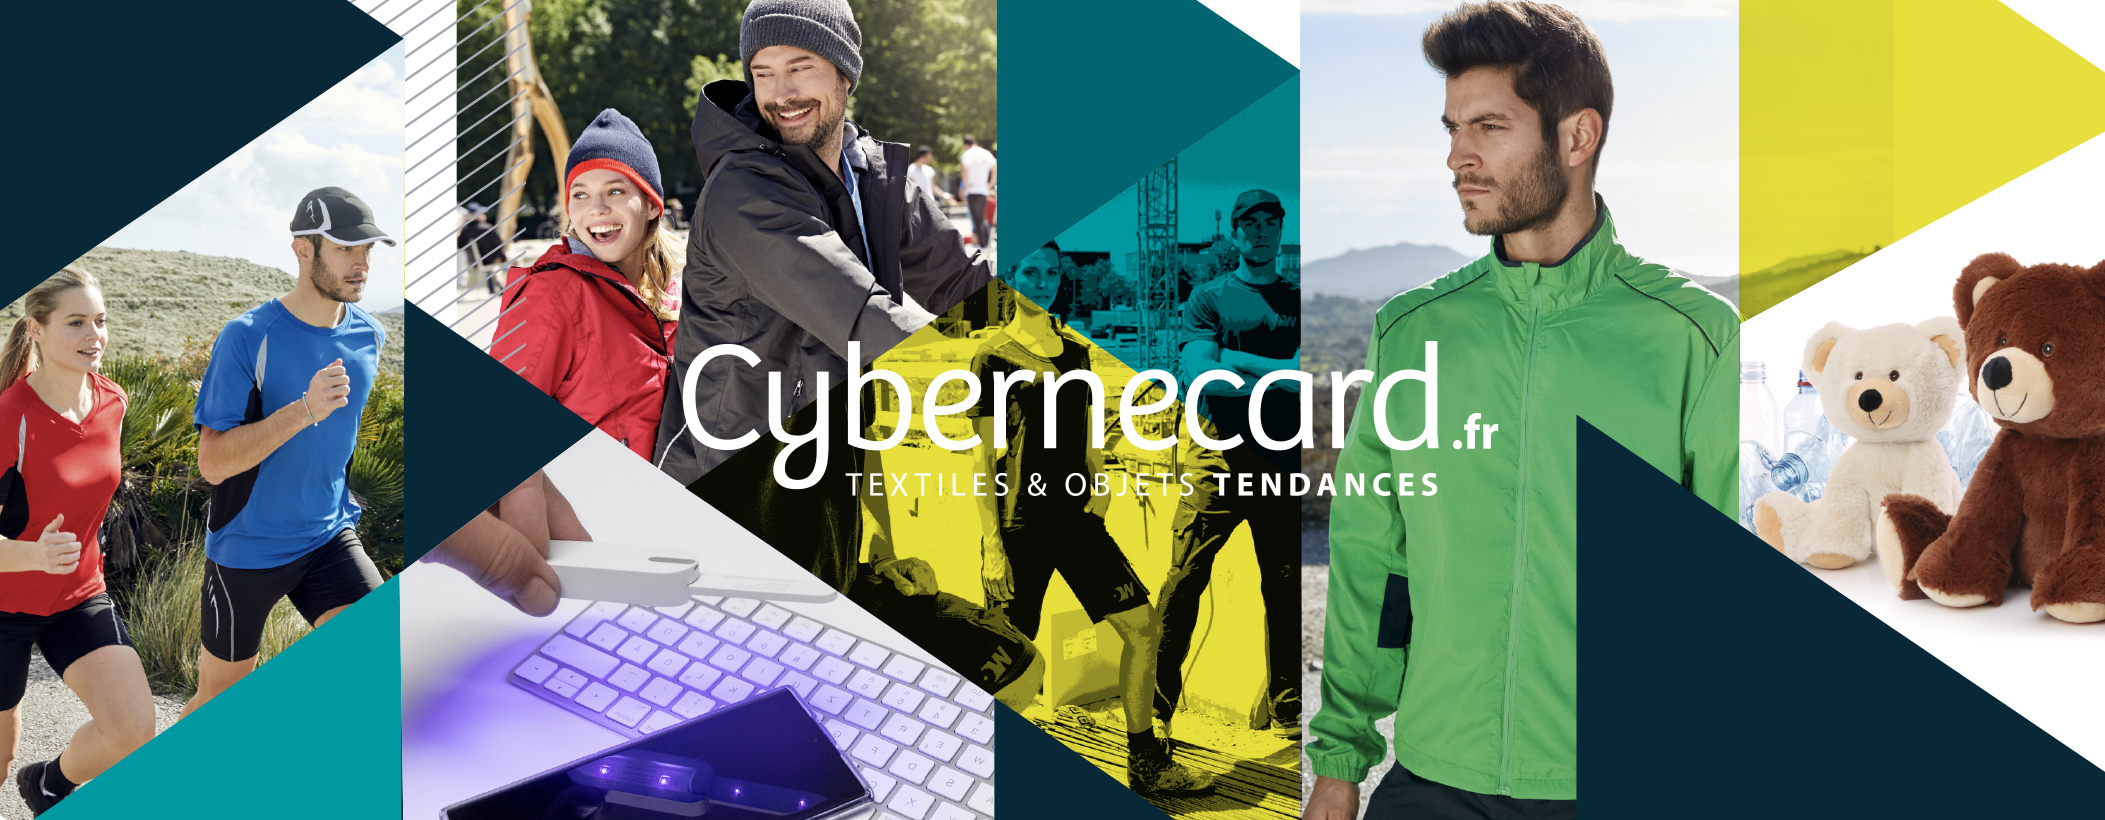 INTERVIEW: OUR QUESTIONS TO CYBERNECARD, EXHIBITOR 2020